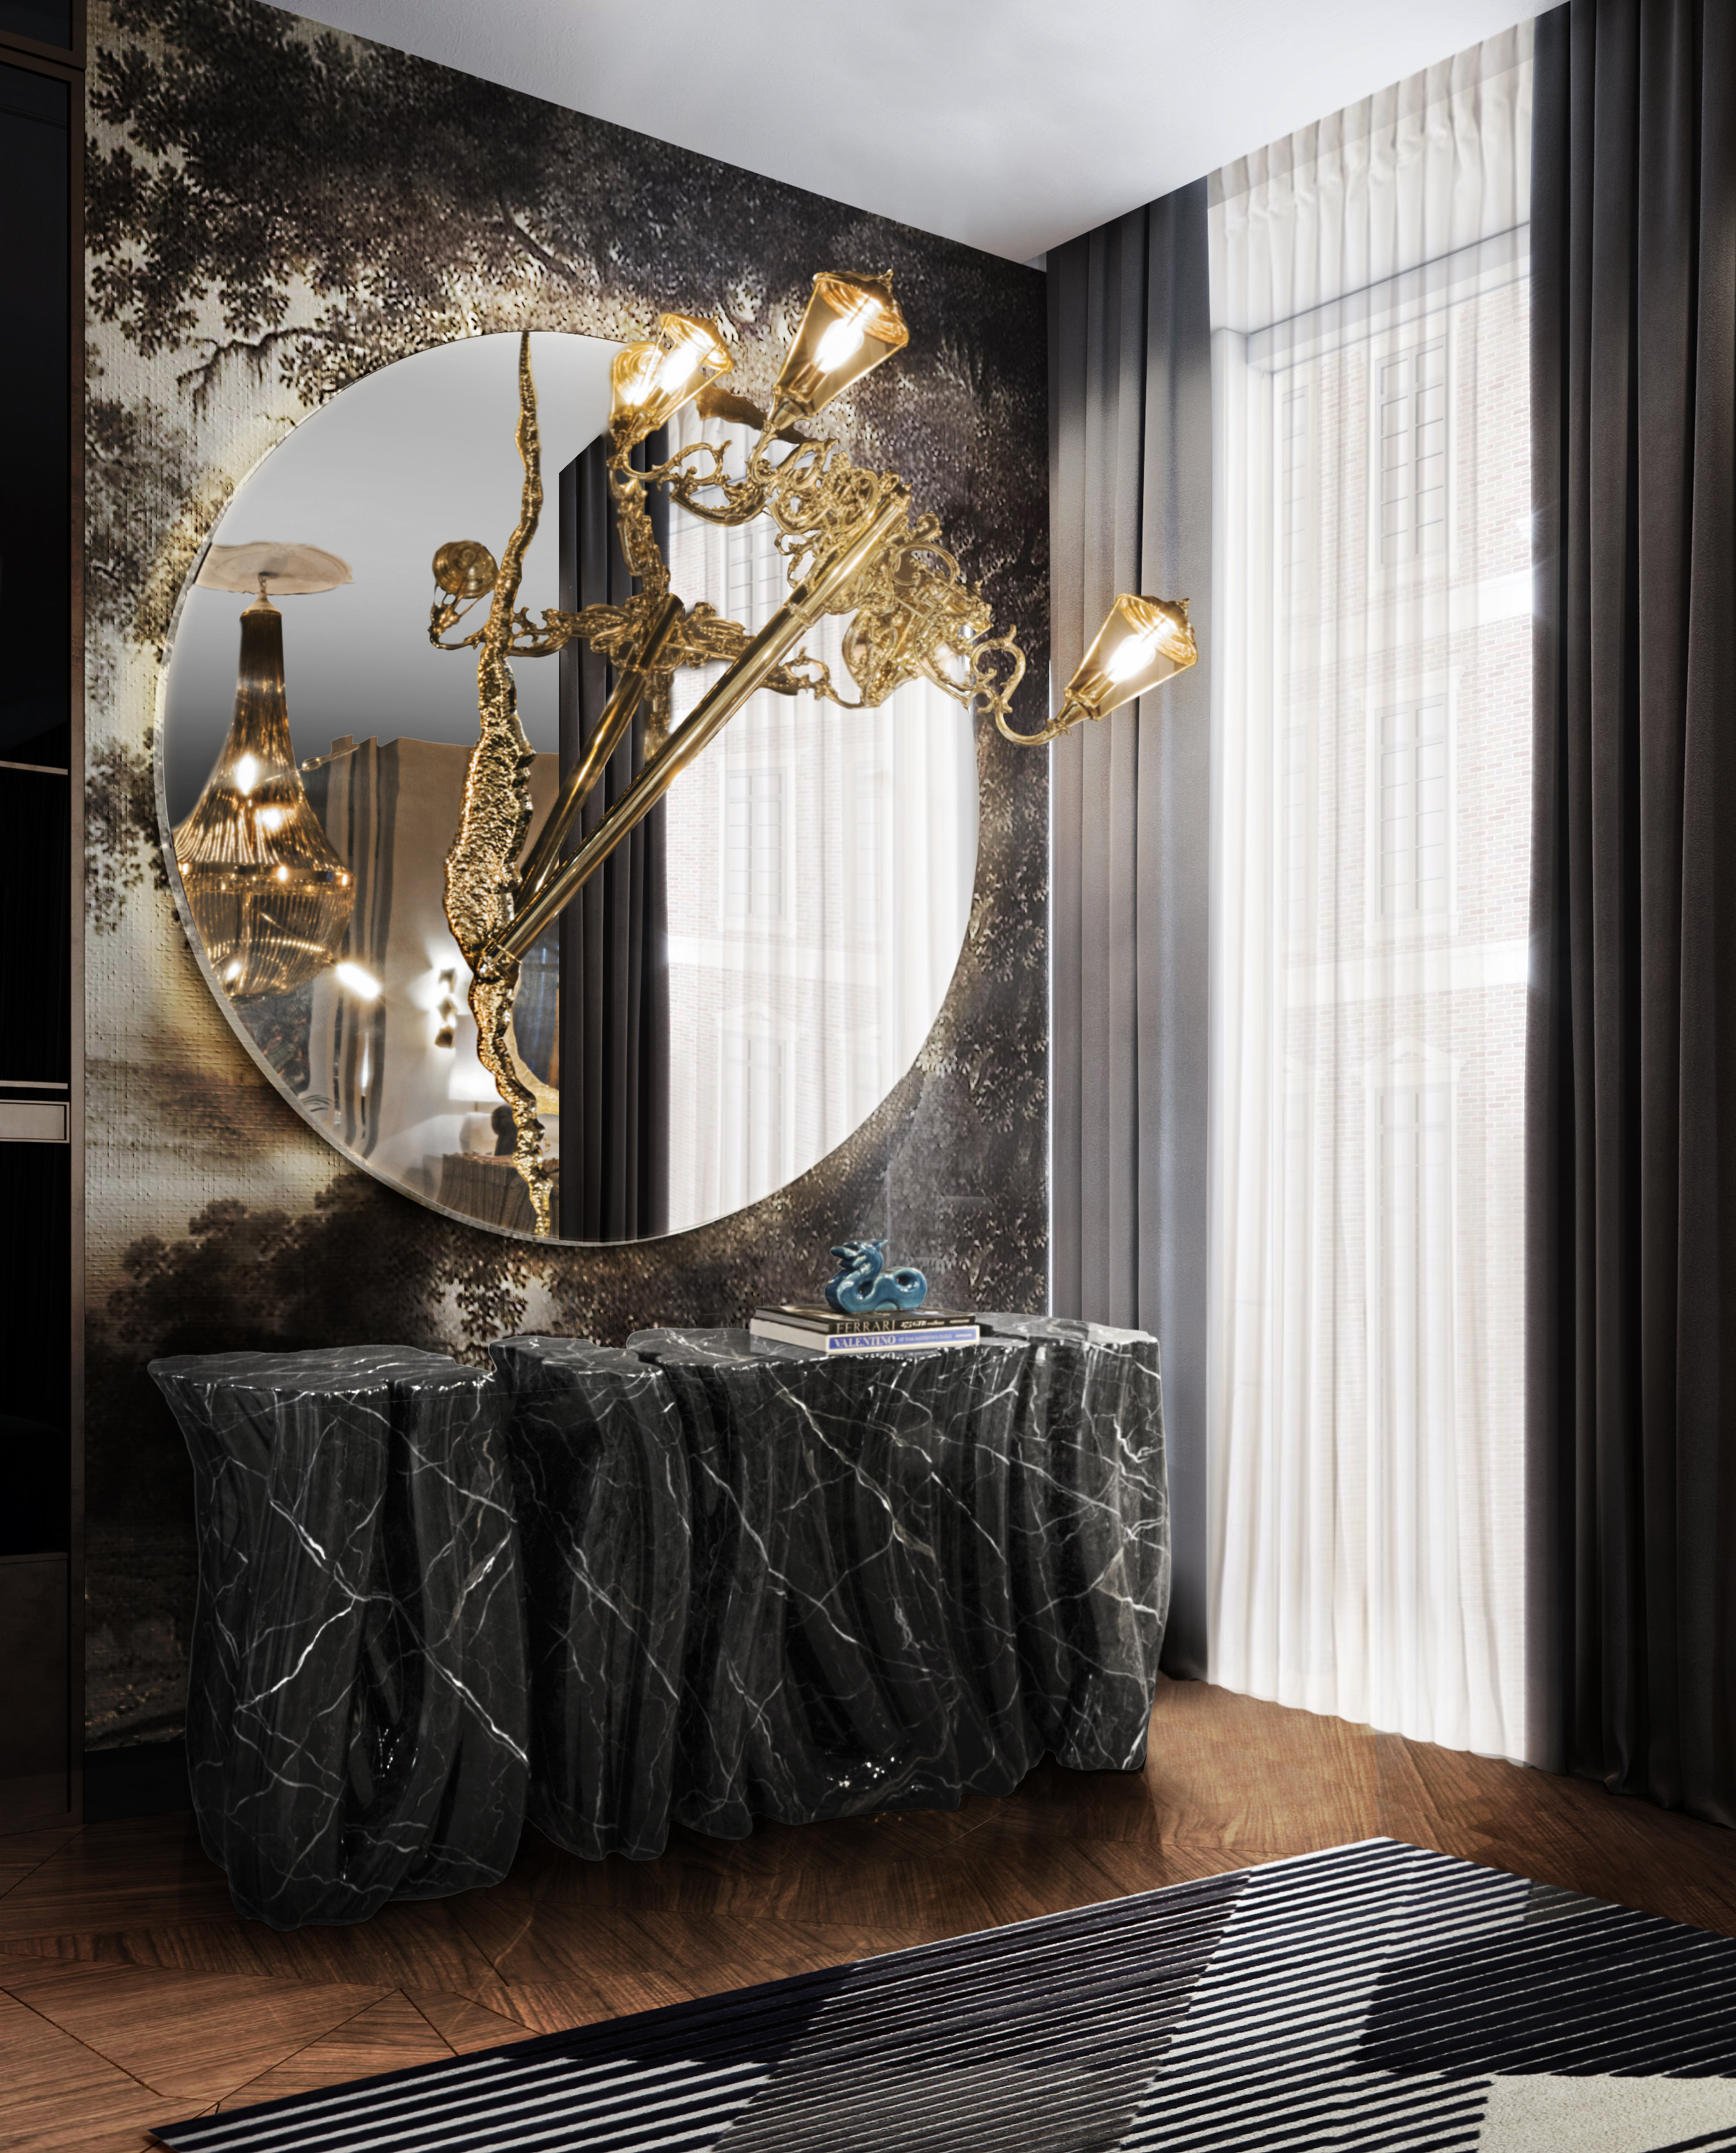 Discover The Most Exquisite Room By Room Inspirations With Luxxu